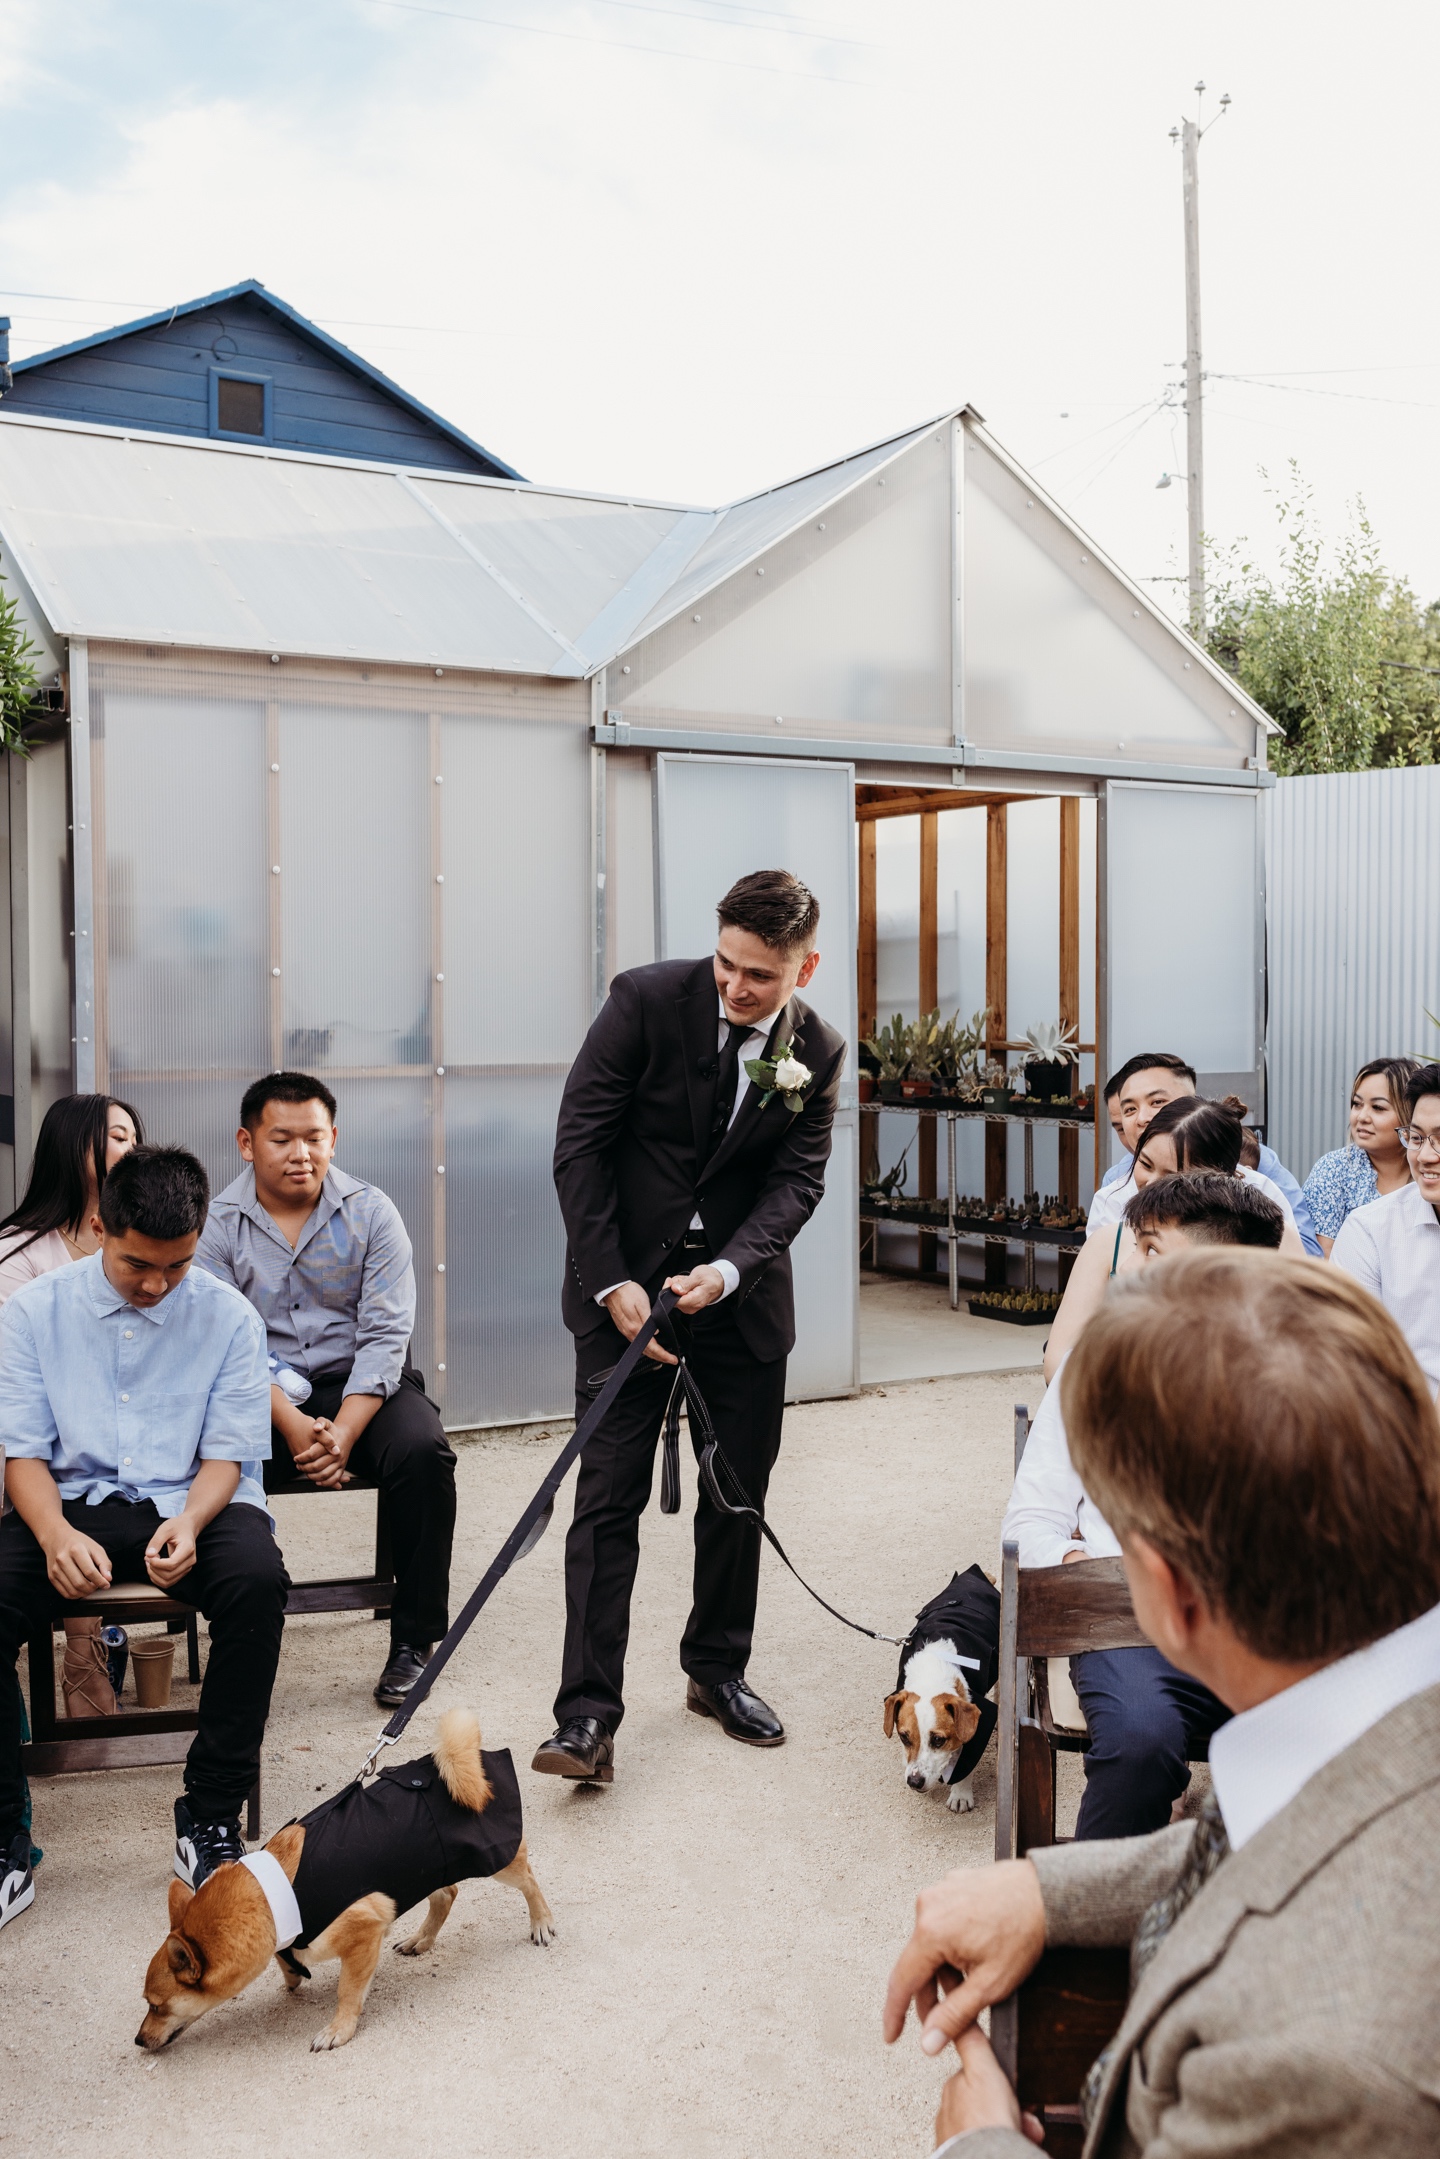 Groom walks down the aisle with two small dogs wearing suits for his Prickly Pear wedding.